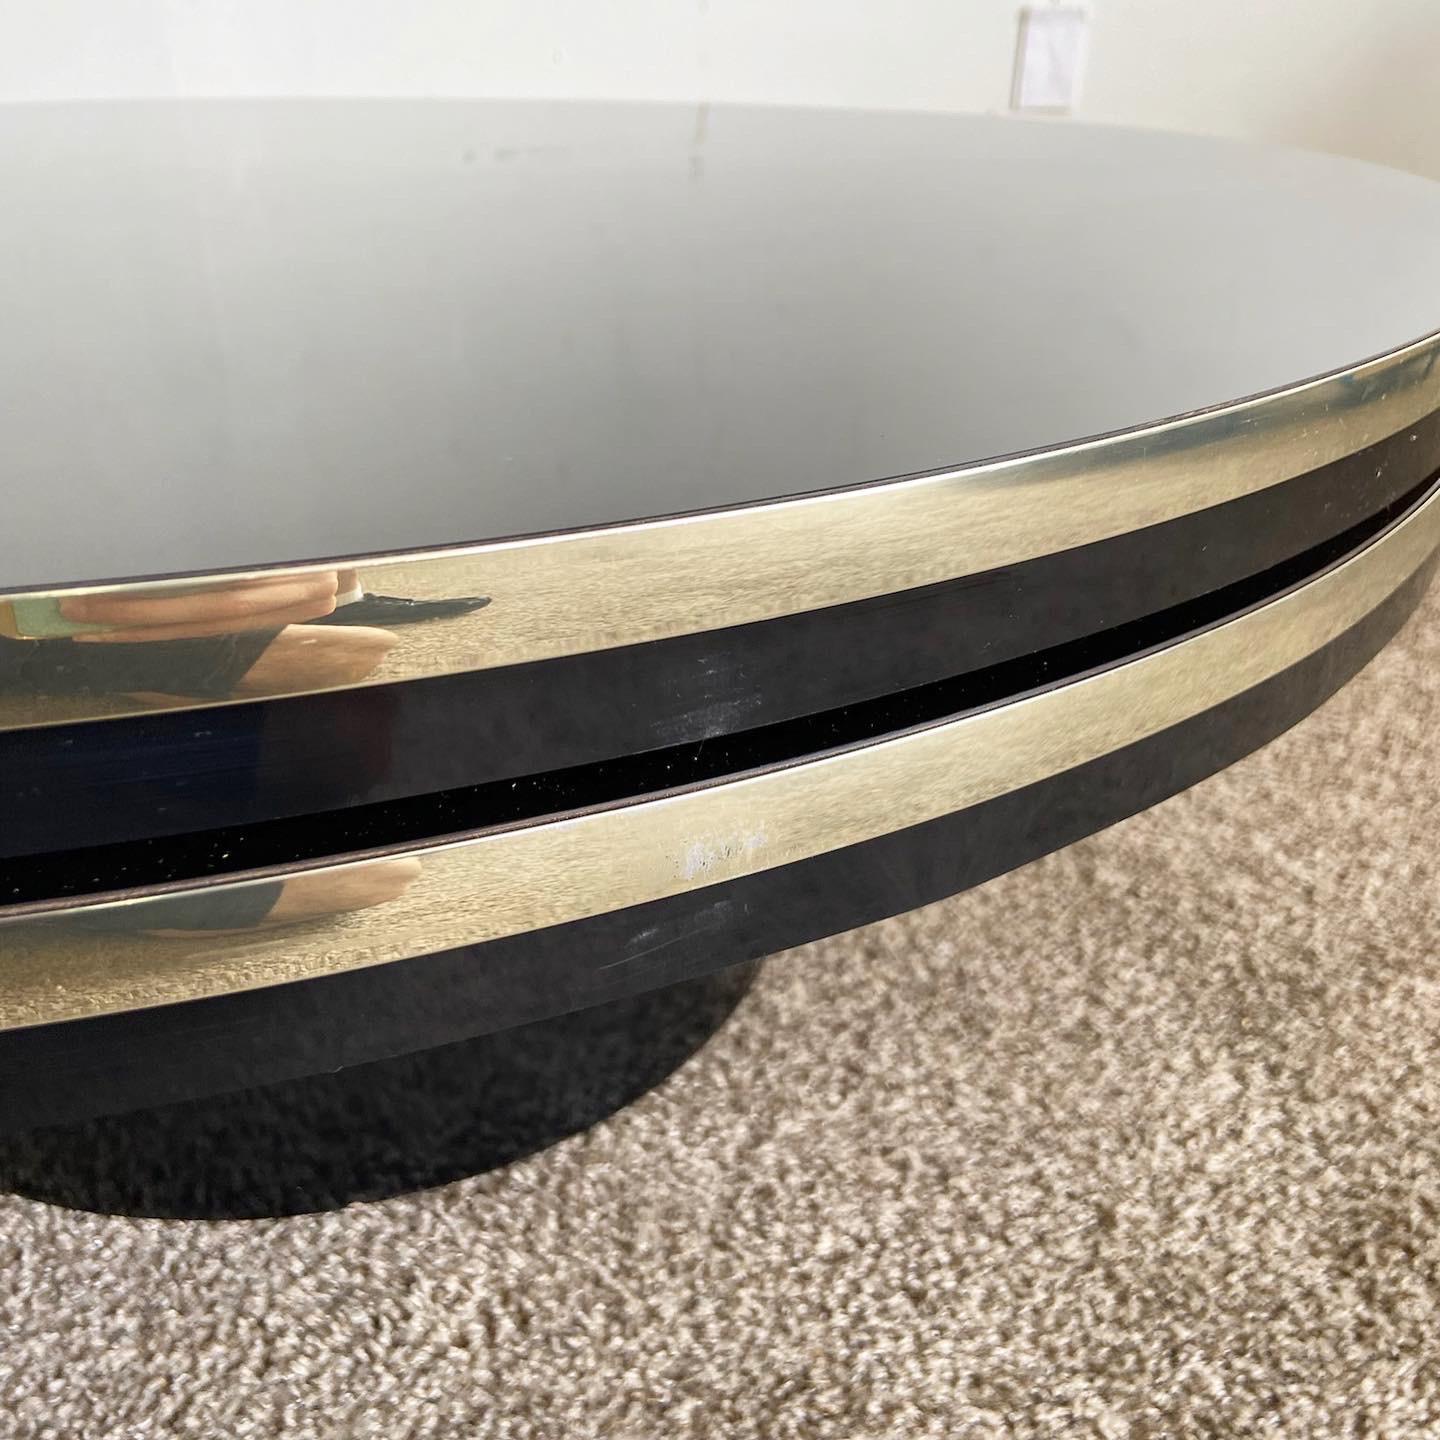 Experience versatility and style with our Postmodern Black Lacquer Laminate Circular Two Tier Swivel Coffee Table with Gold Trim. This unique coffee table features two tiers that swivel 360 degrees, offering flexibility and a dynamic visual appeal.